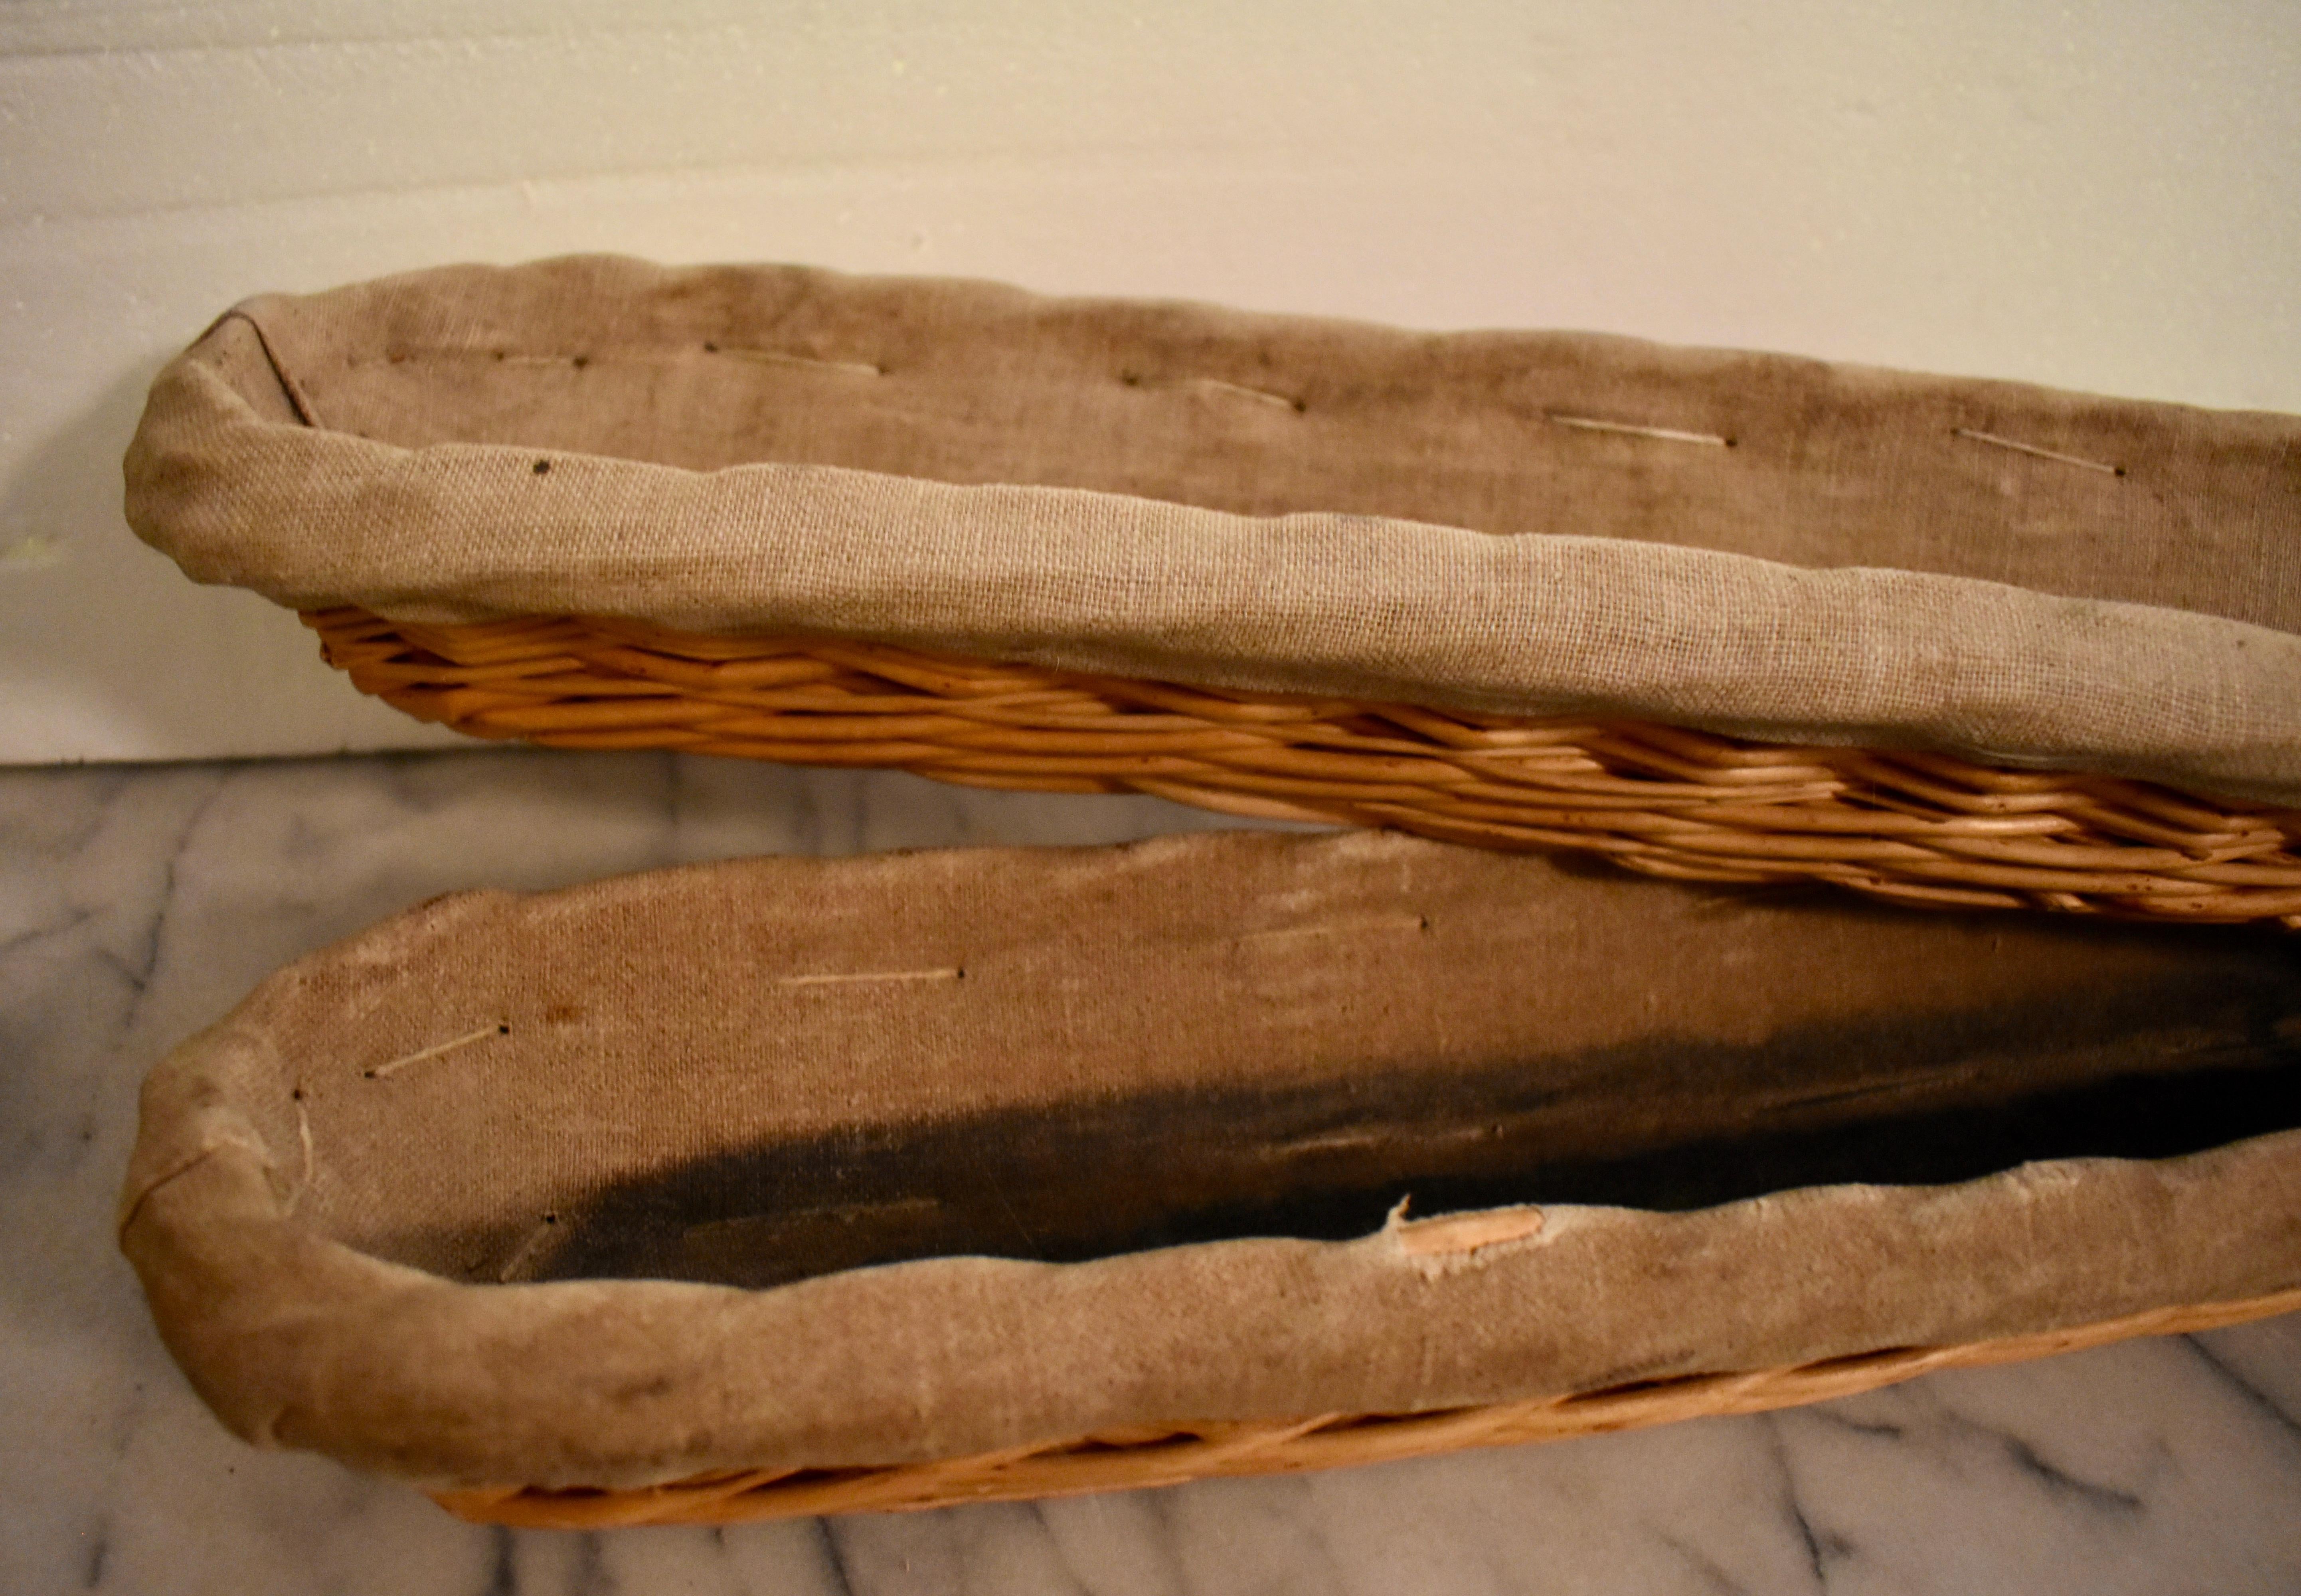 French Provincial French Brittany Boulangerie Baguette Linen Lined Proving Basket, circa 1900